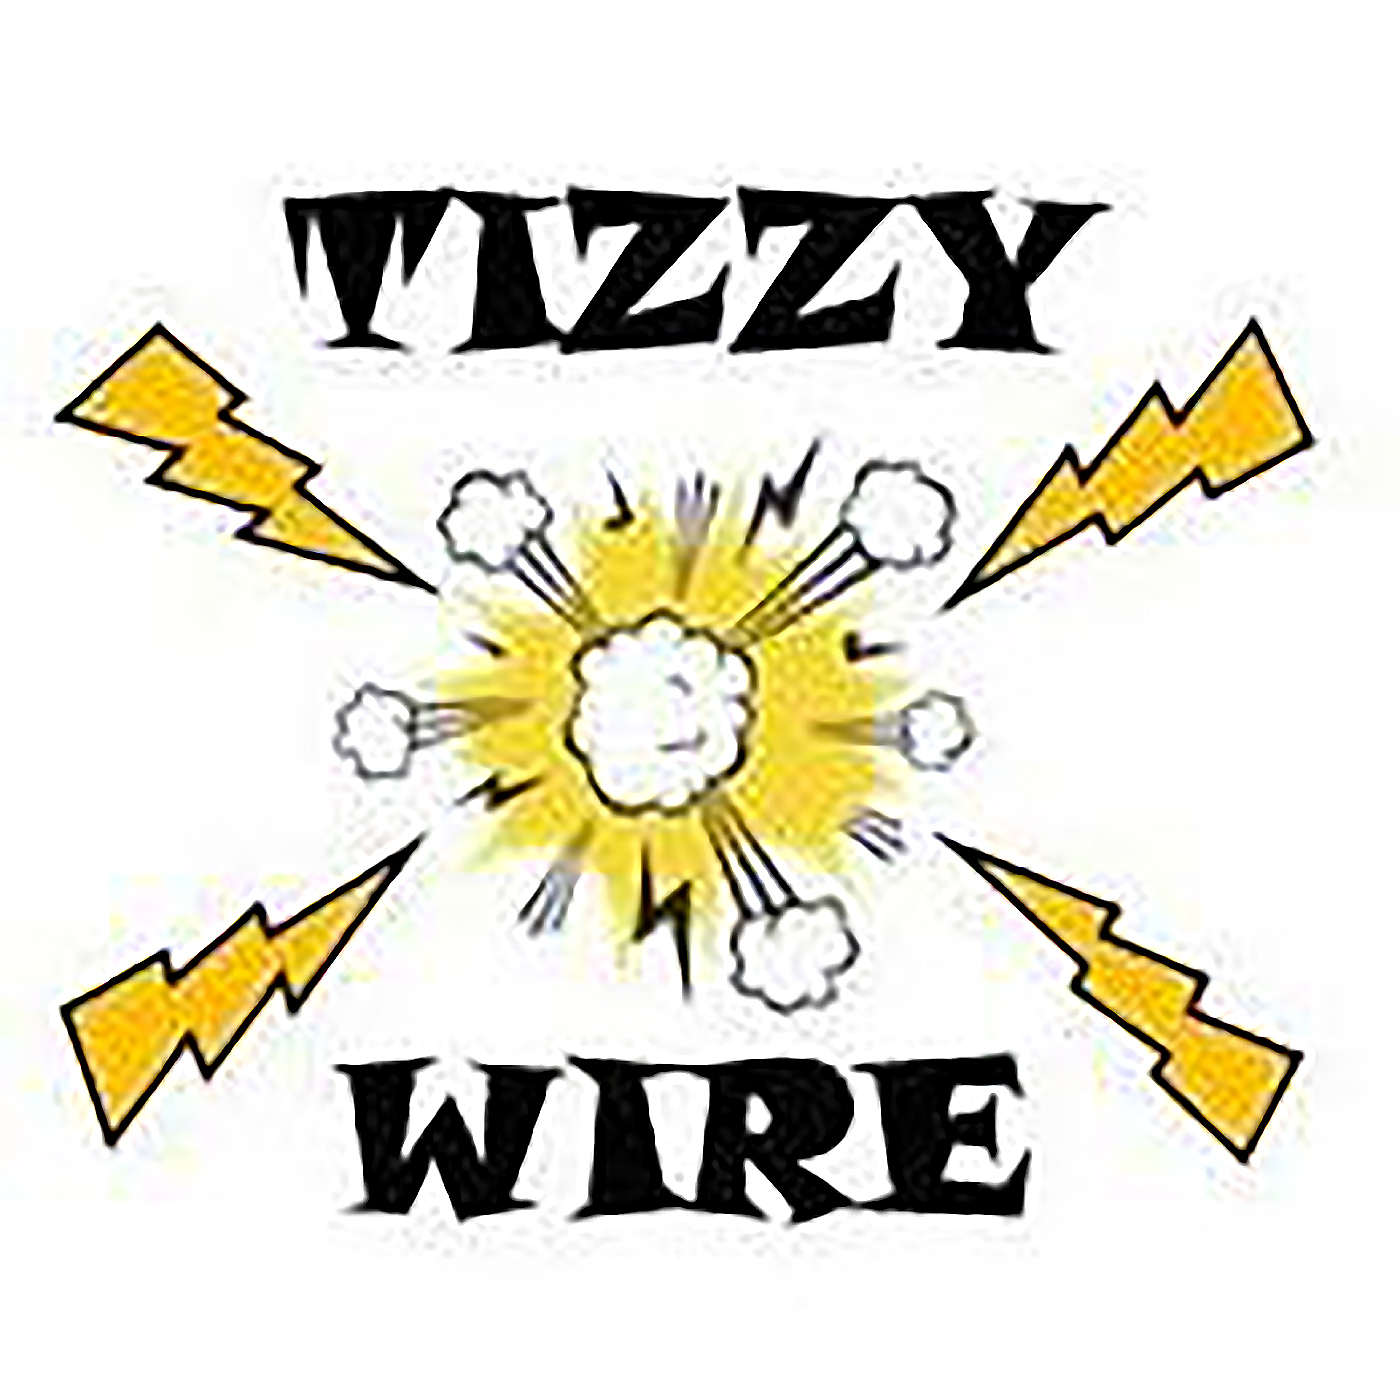 Tizzy Wire Podcast - Ep 5 - Who Do You Think You Are?